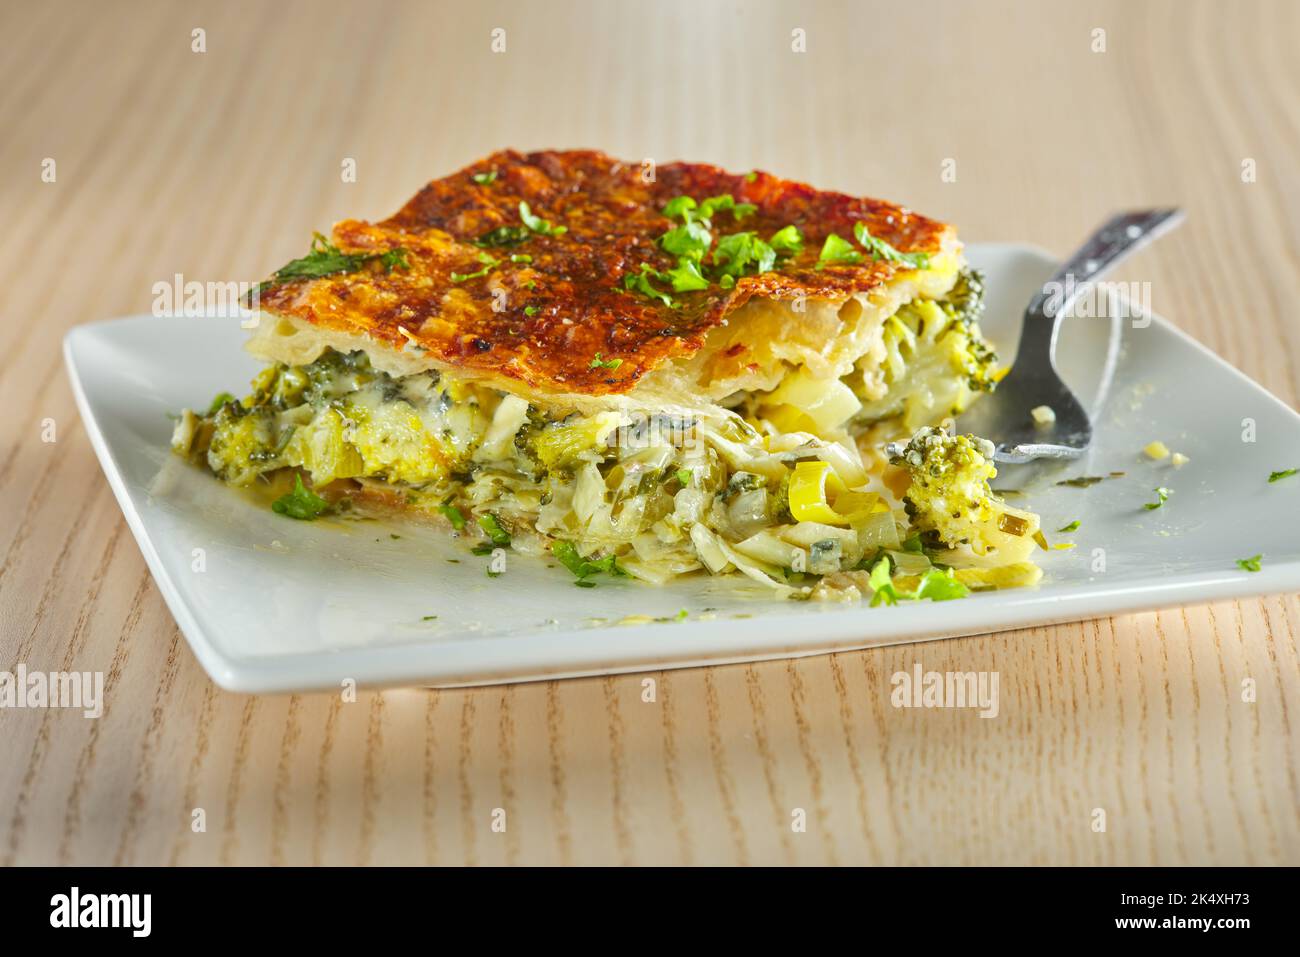 Eating from a pie made from broccoli, cheese, cream  and leek - close up view Stock Photo